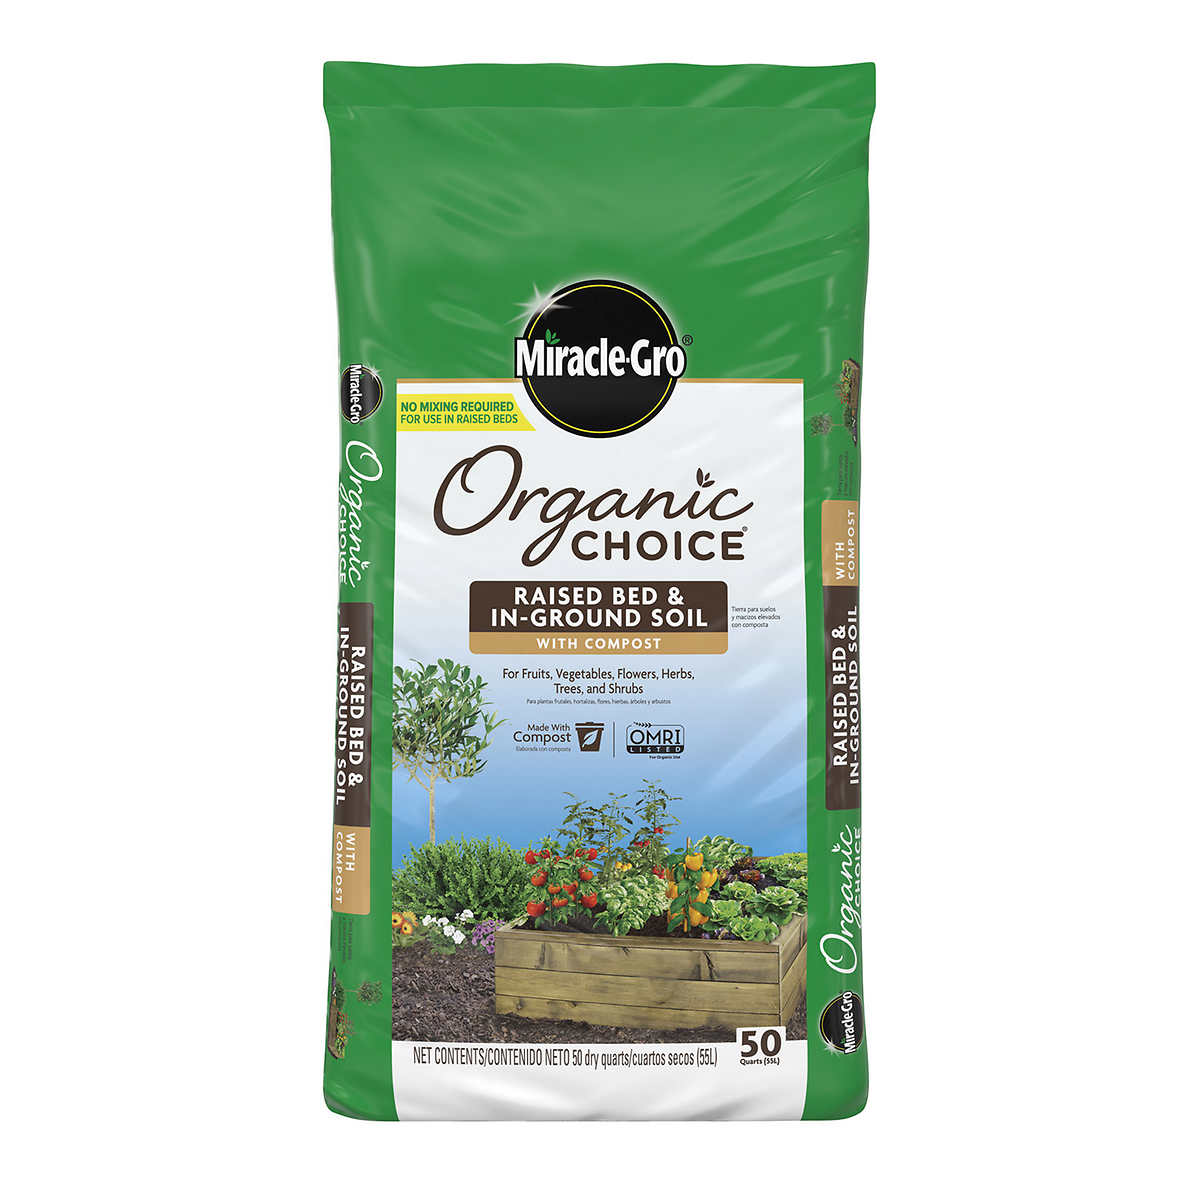 Miracle-Gro Organic Choice, Raised Bed & In-Ground Soil with Compost, 50 Quart